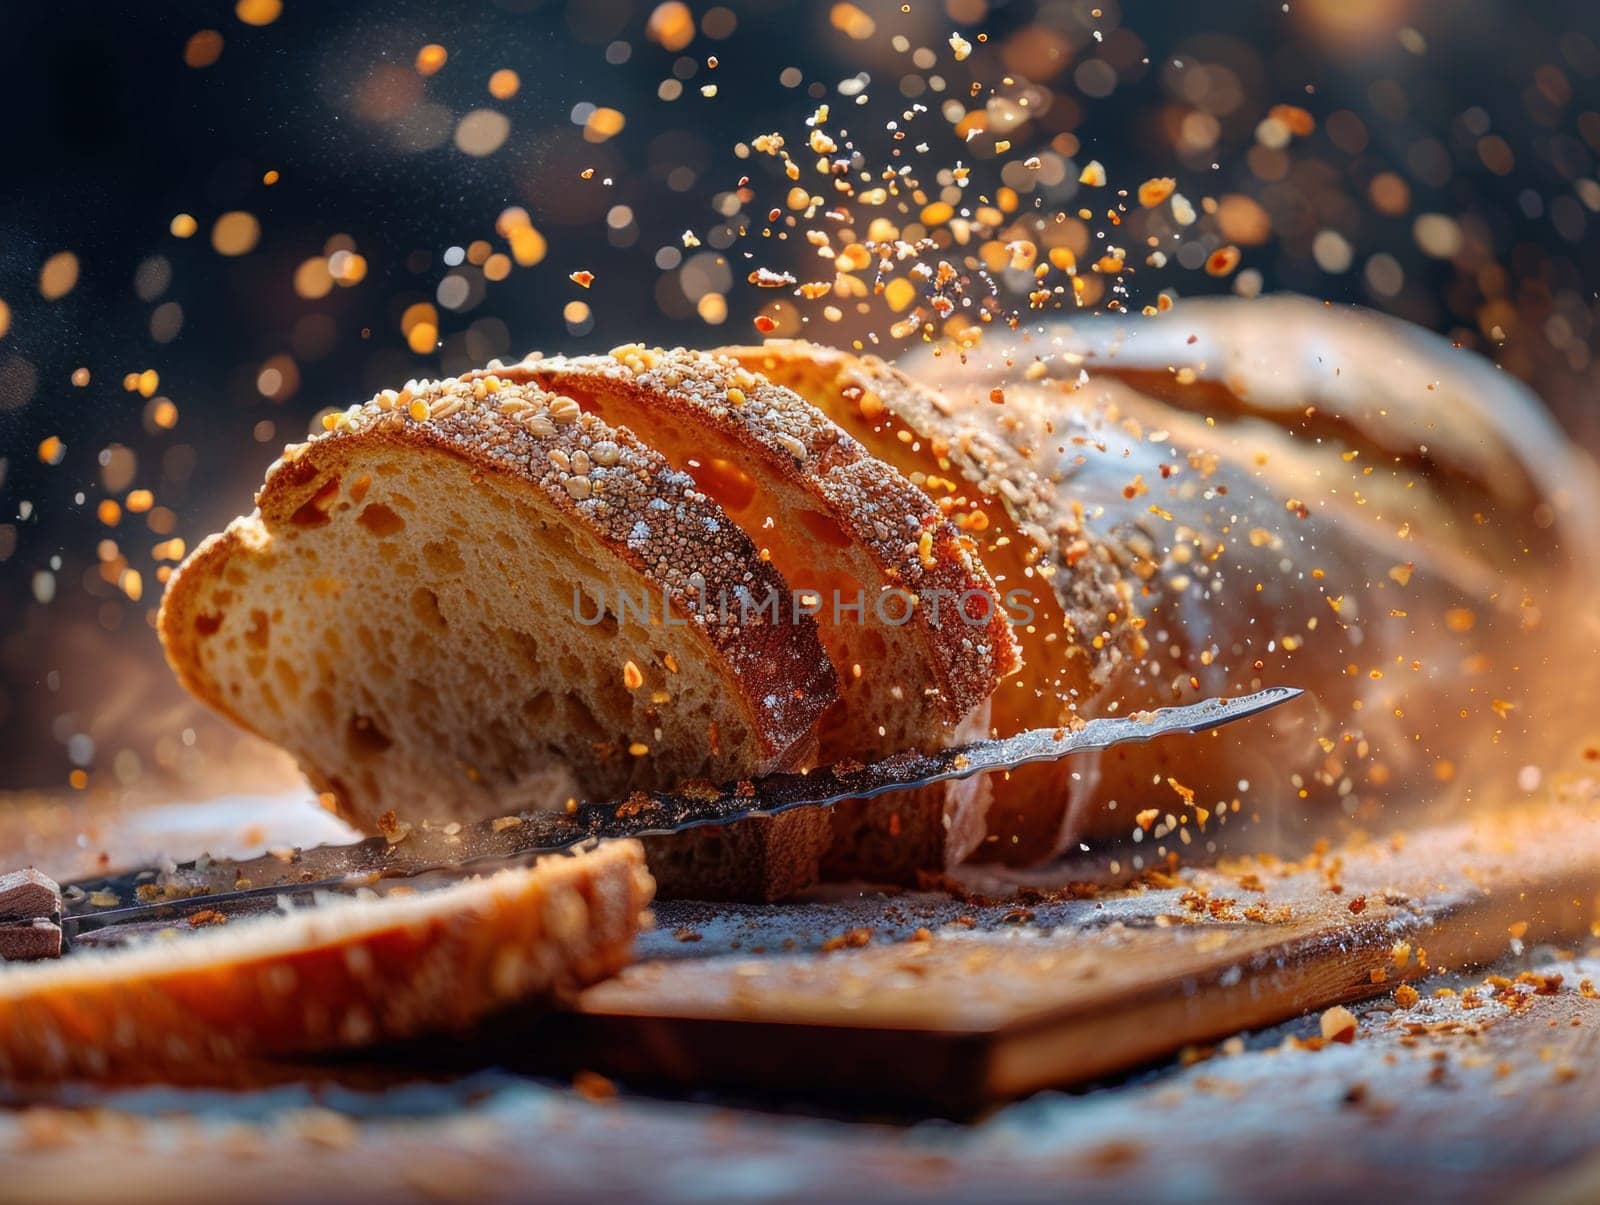 Slicing Bread With Knife by but_photo